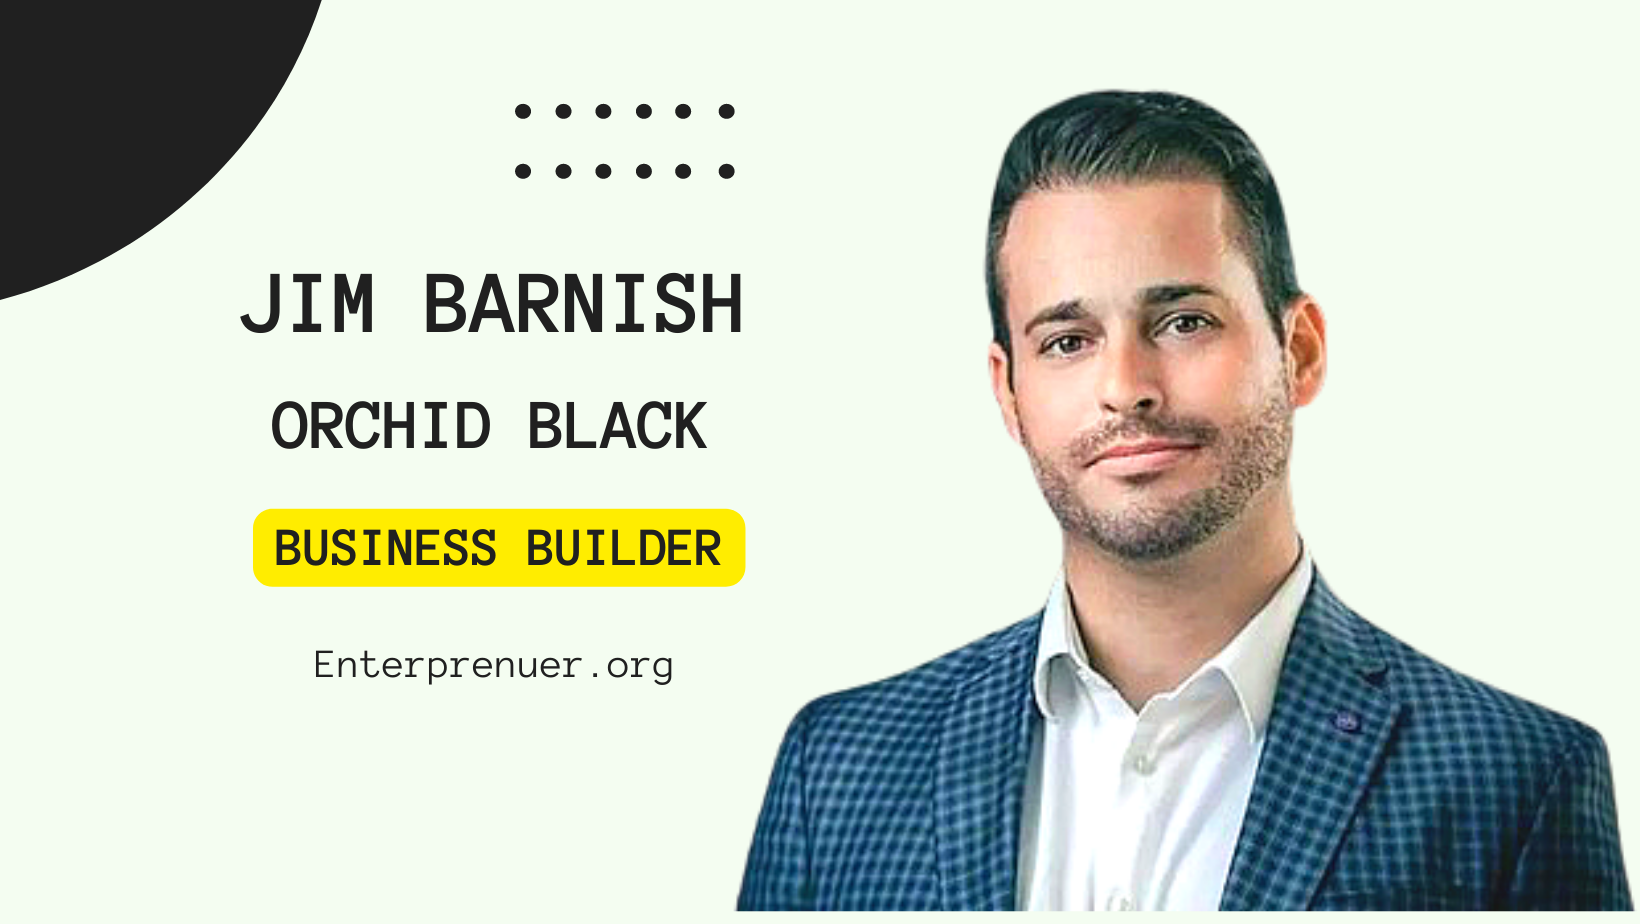 Meet Business Builder Jim Barnish, Co-Founder of Orchid Black